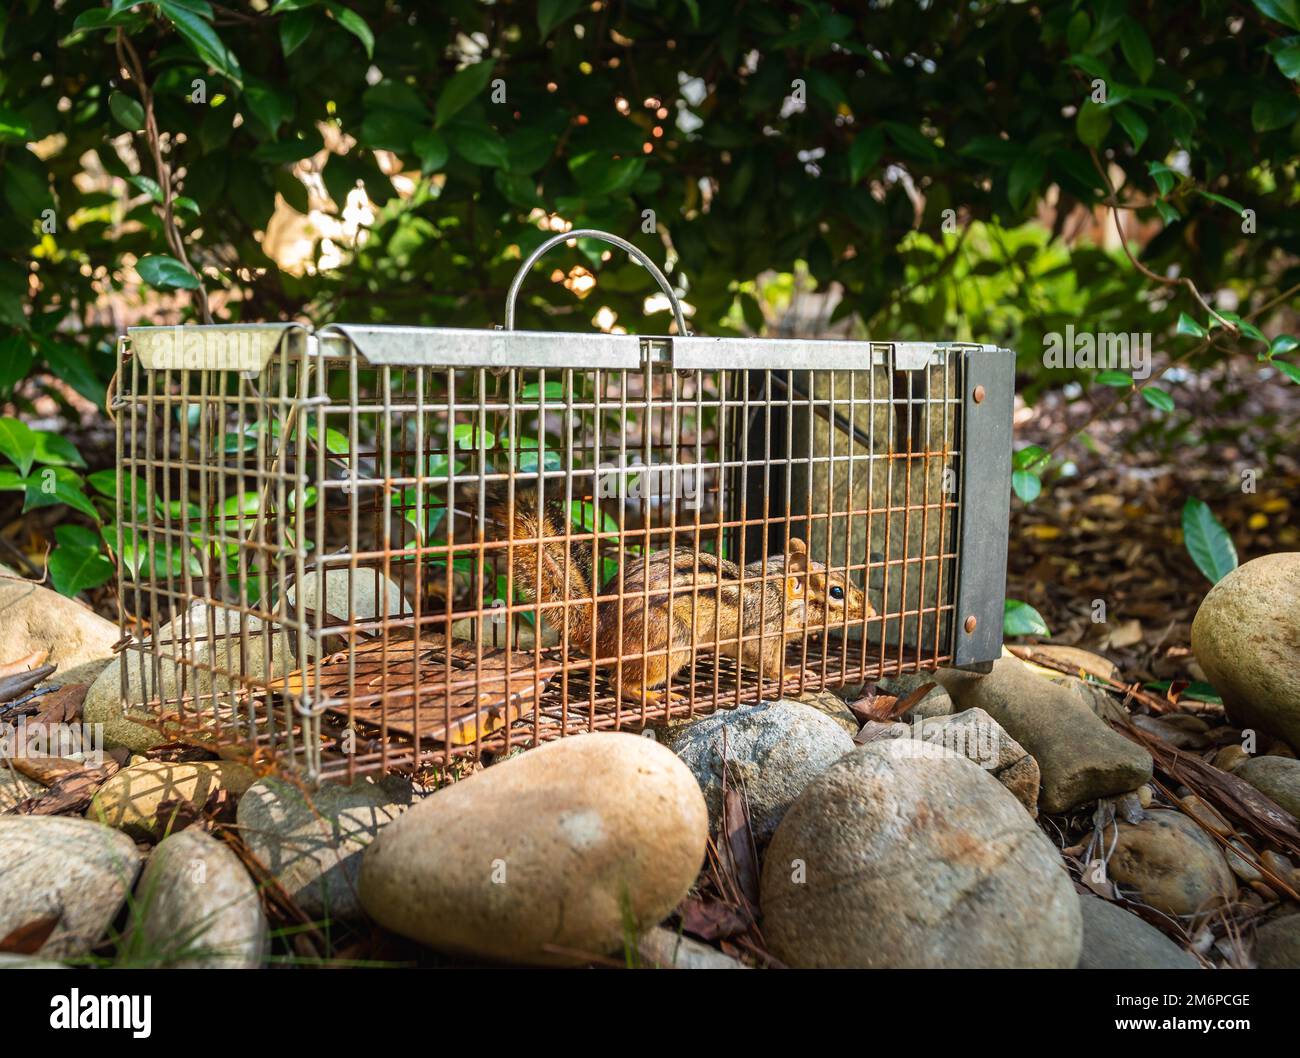 Chipmunk in live humane trap. Pest and rodent removal cage. Catch and release wildlife animal control service. Stock Photo